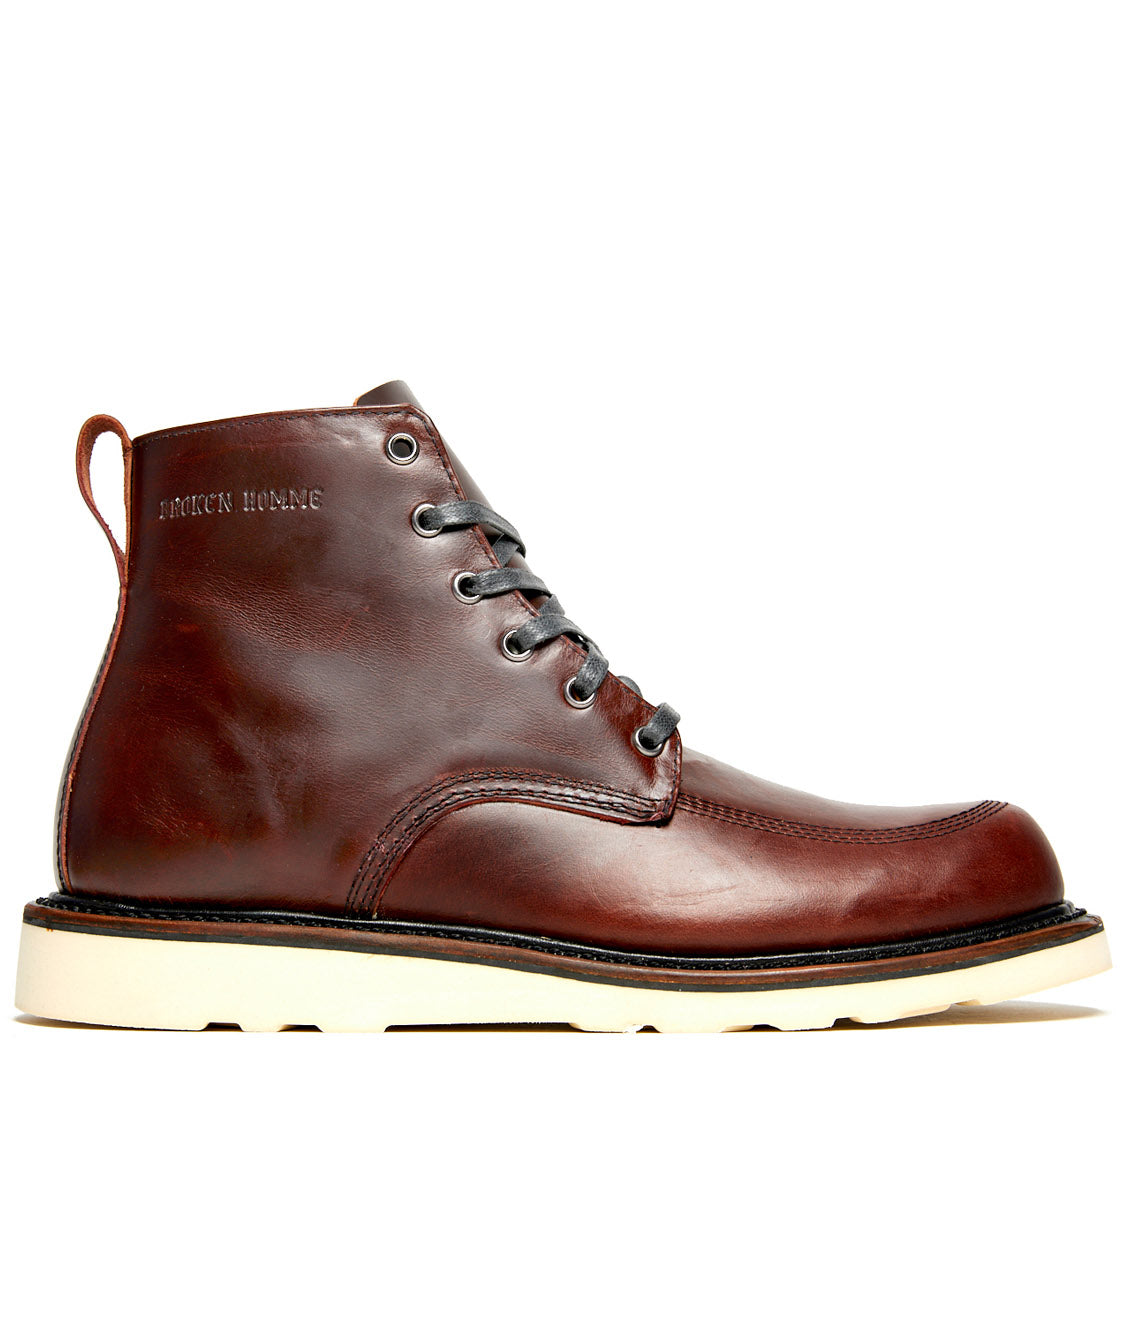 A comfortable fit Jaime Boot made by Broken Homme, made of brown leather on a white background.